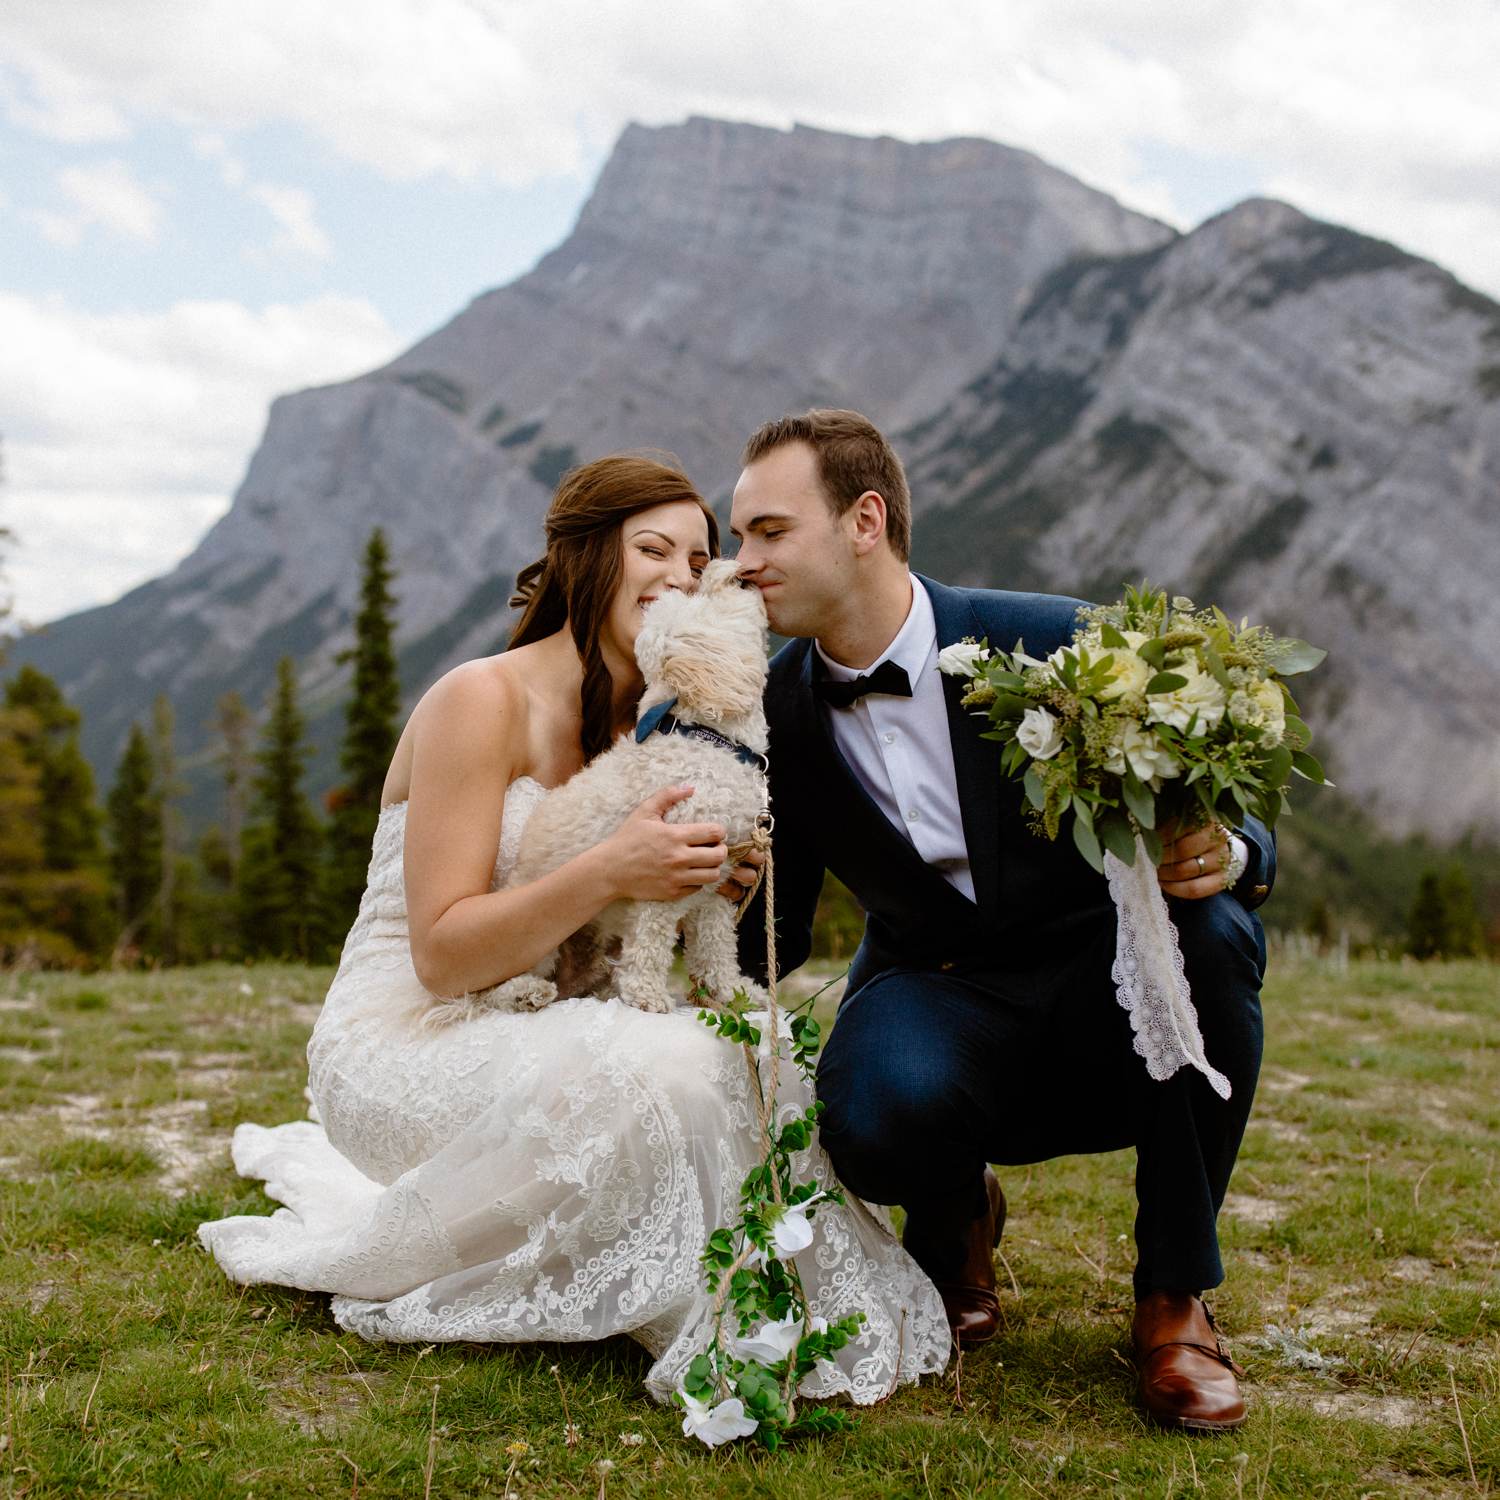 Banff wedding photographer pricing packages and destination elopements